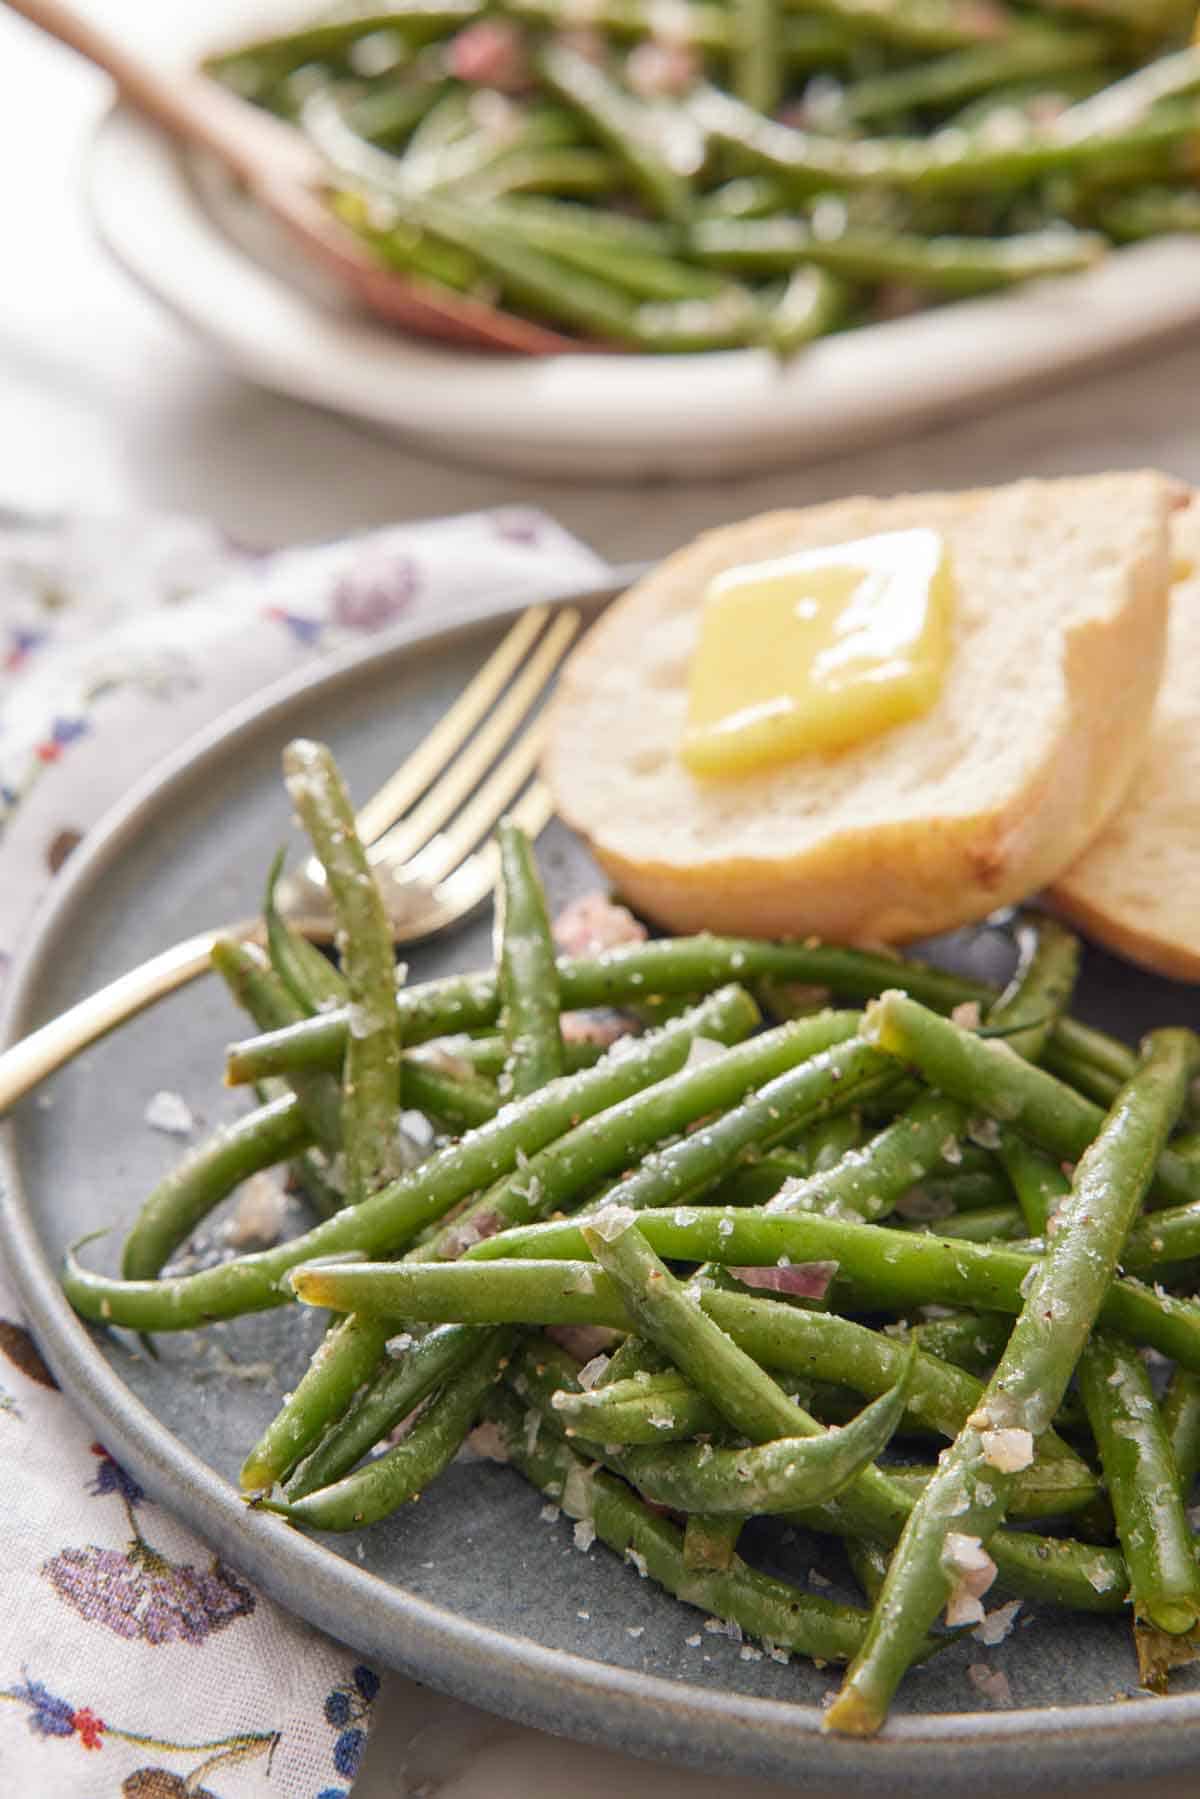 A close up view of French green beans on a plate with a fork and bread with some butter on it.